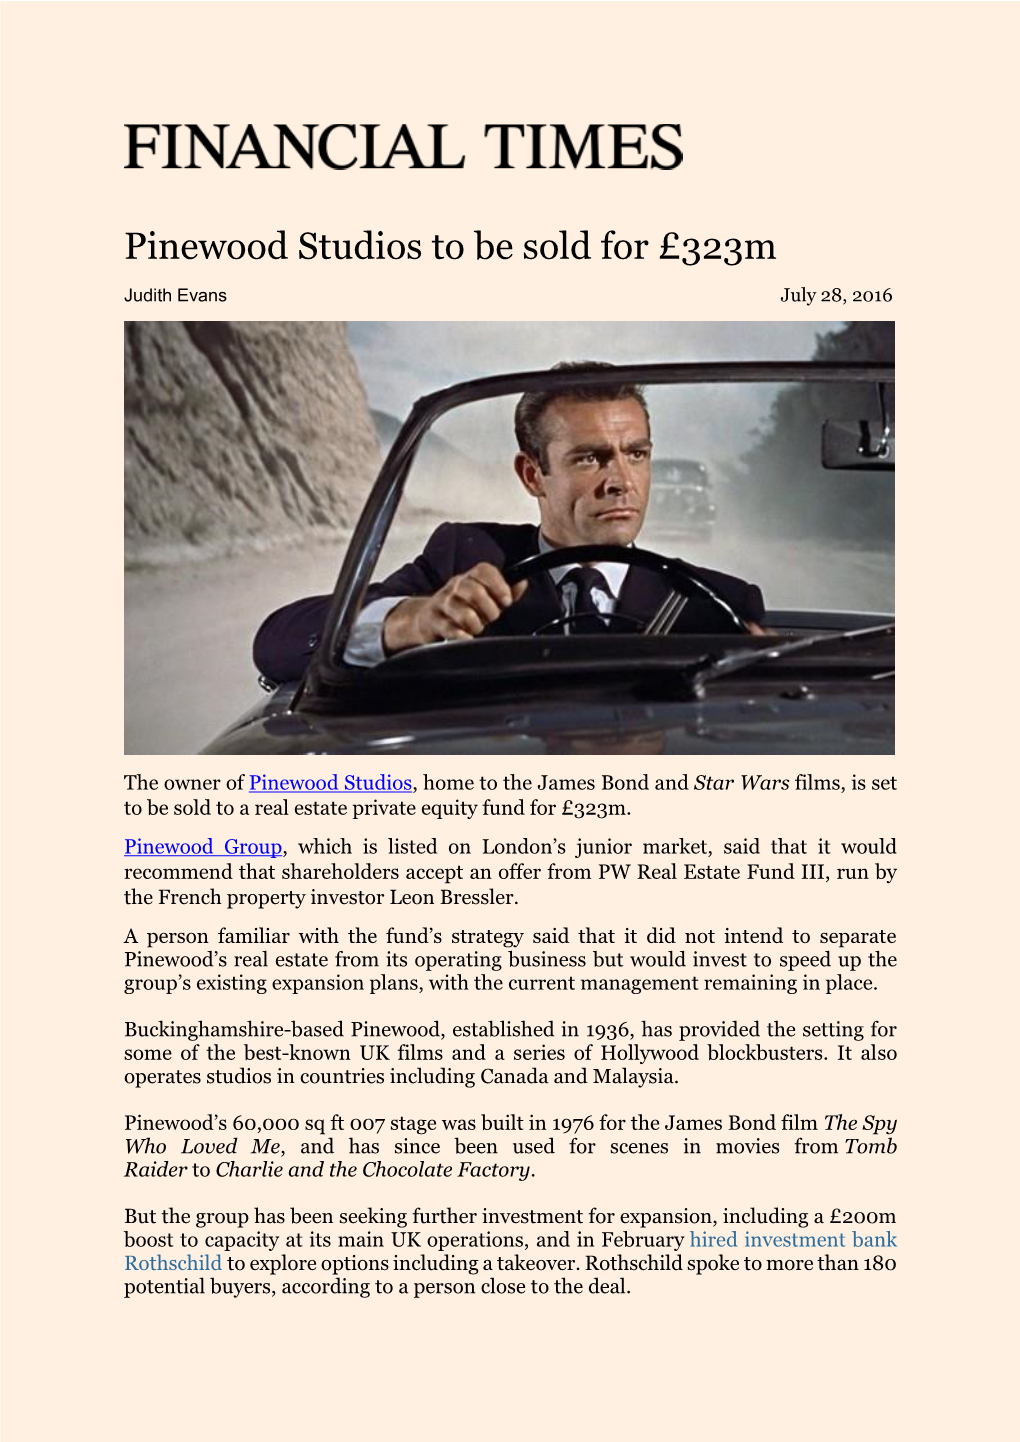 Pinewood Studios to Be Sold for £323M 280716